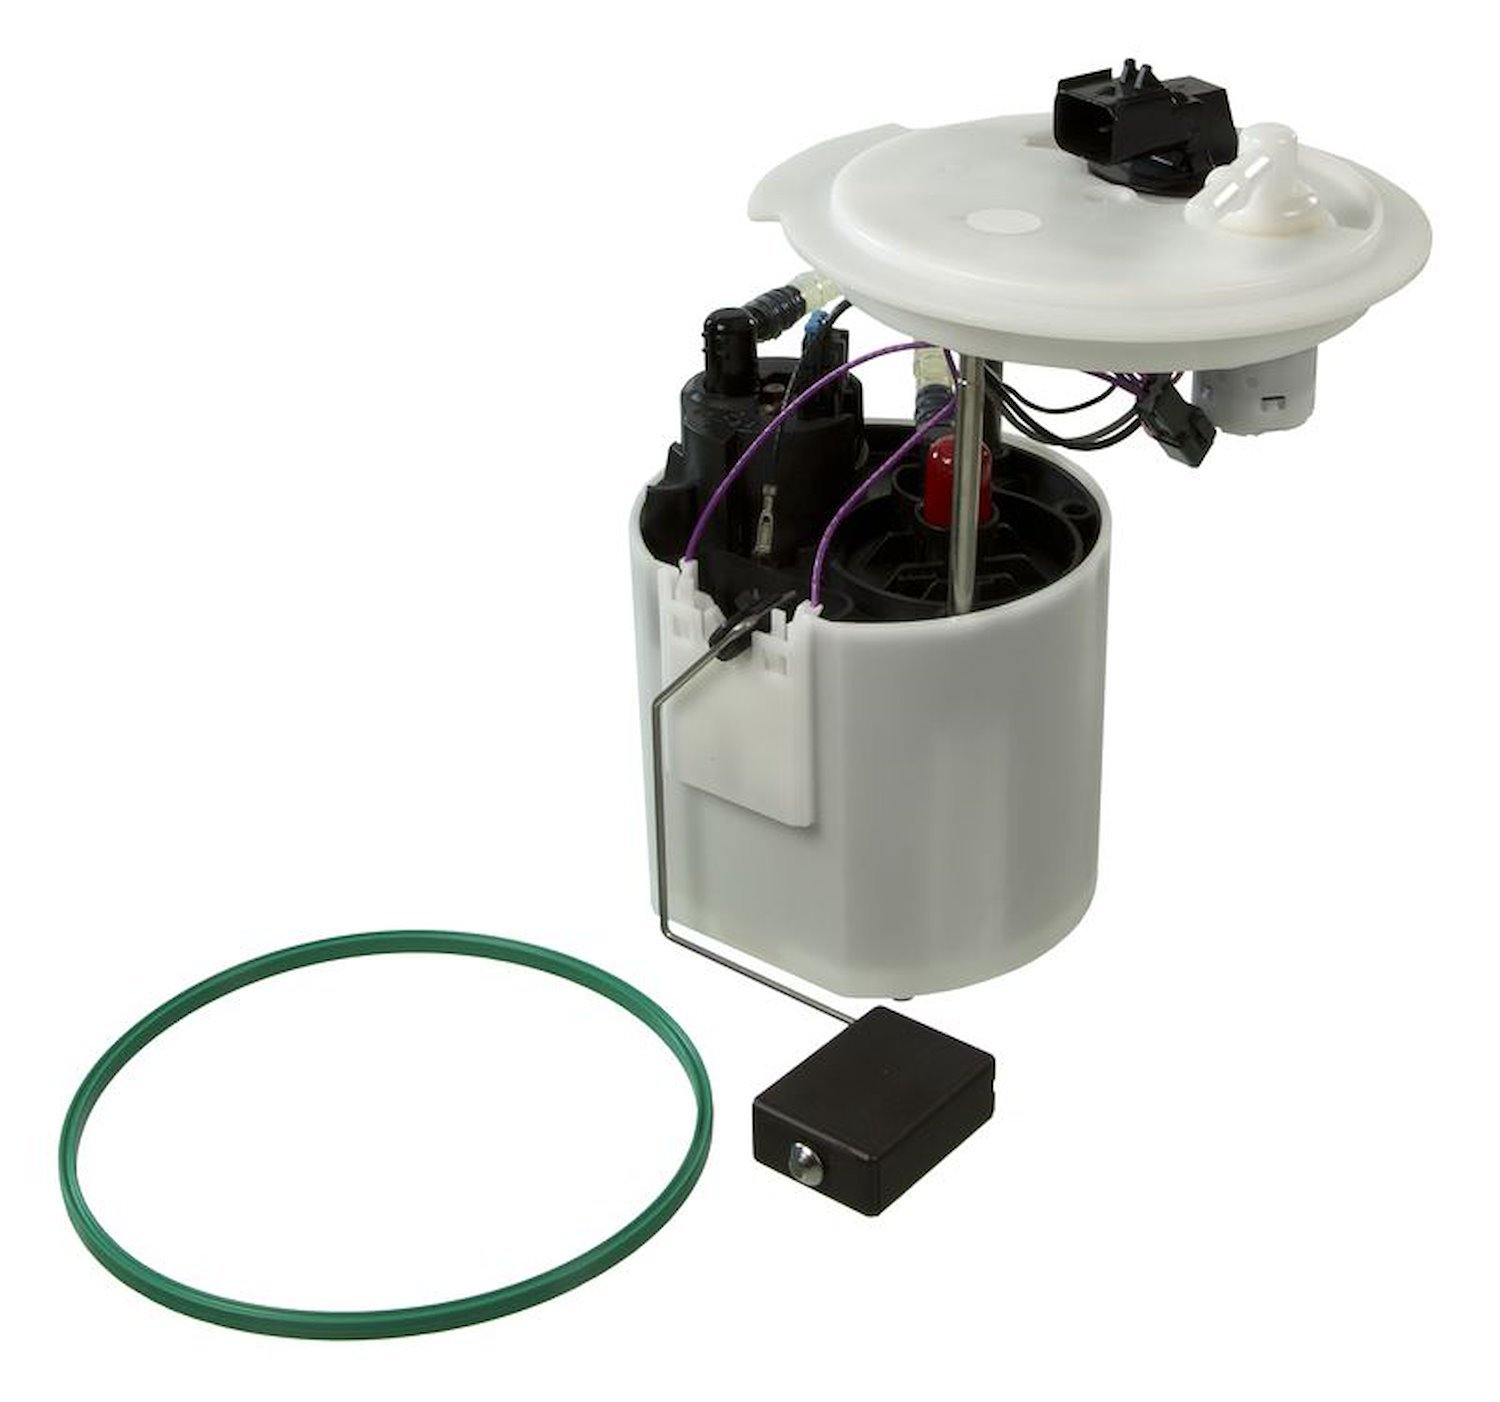 OE Chrysler/Dodge Replacement Fuel Pump Module Assembly 2007-2008 Chrysler Pacifica